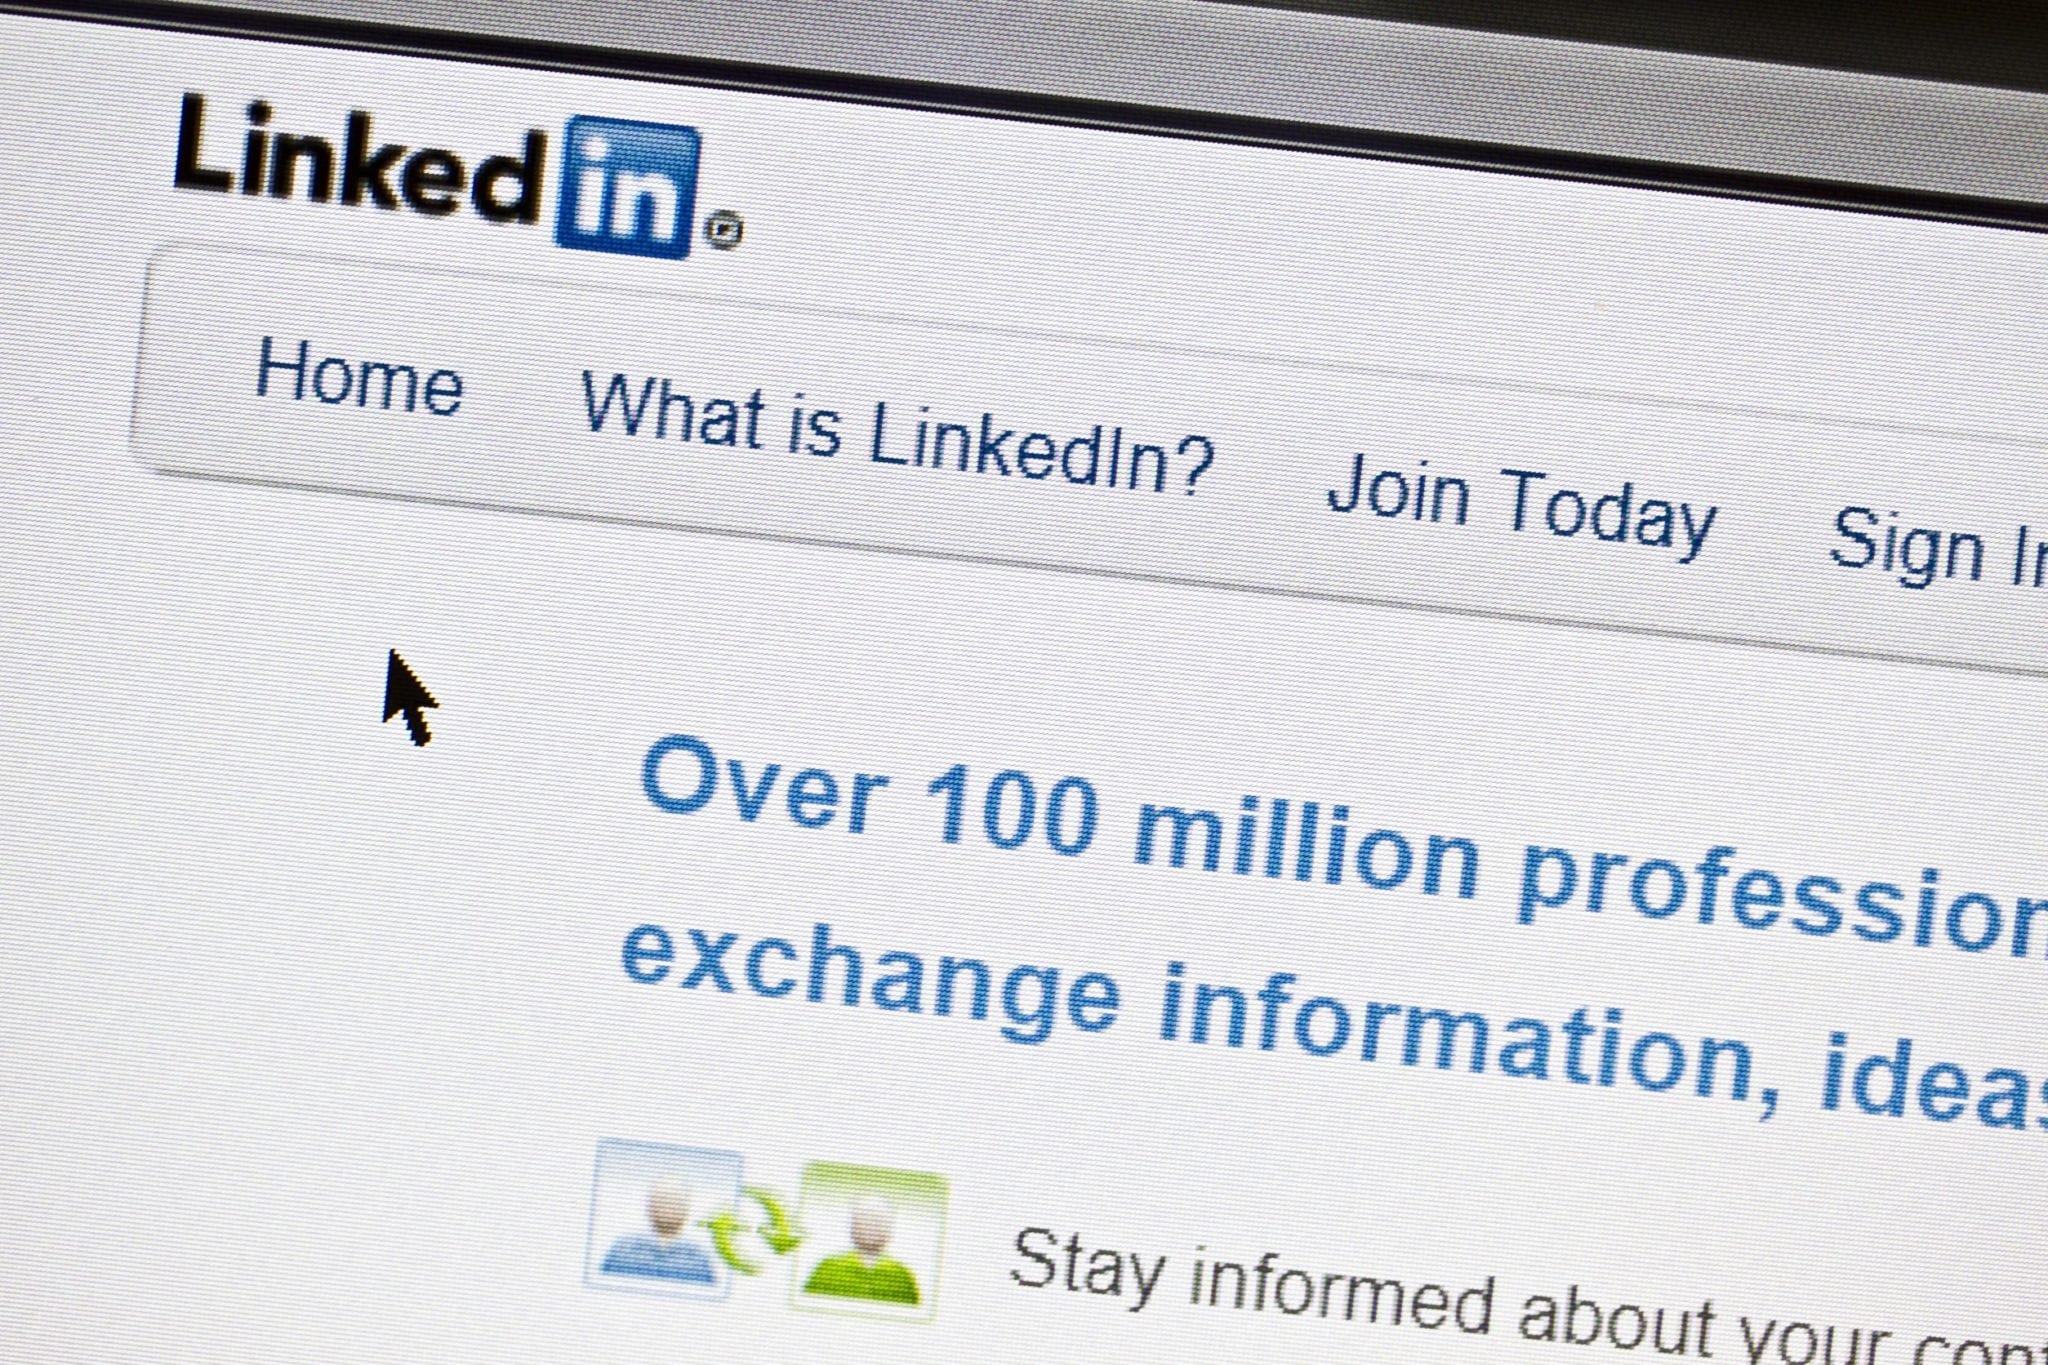 How to edit or remove a secondary company LinkedIn account